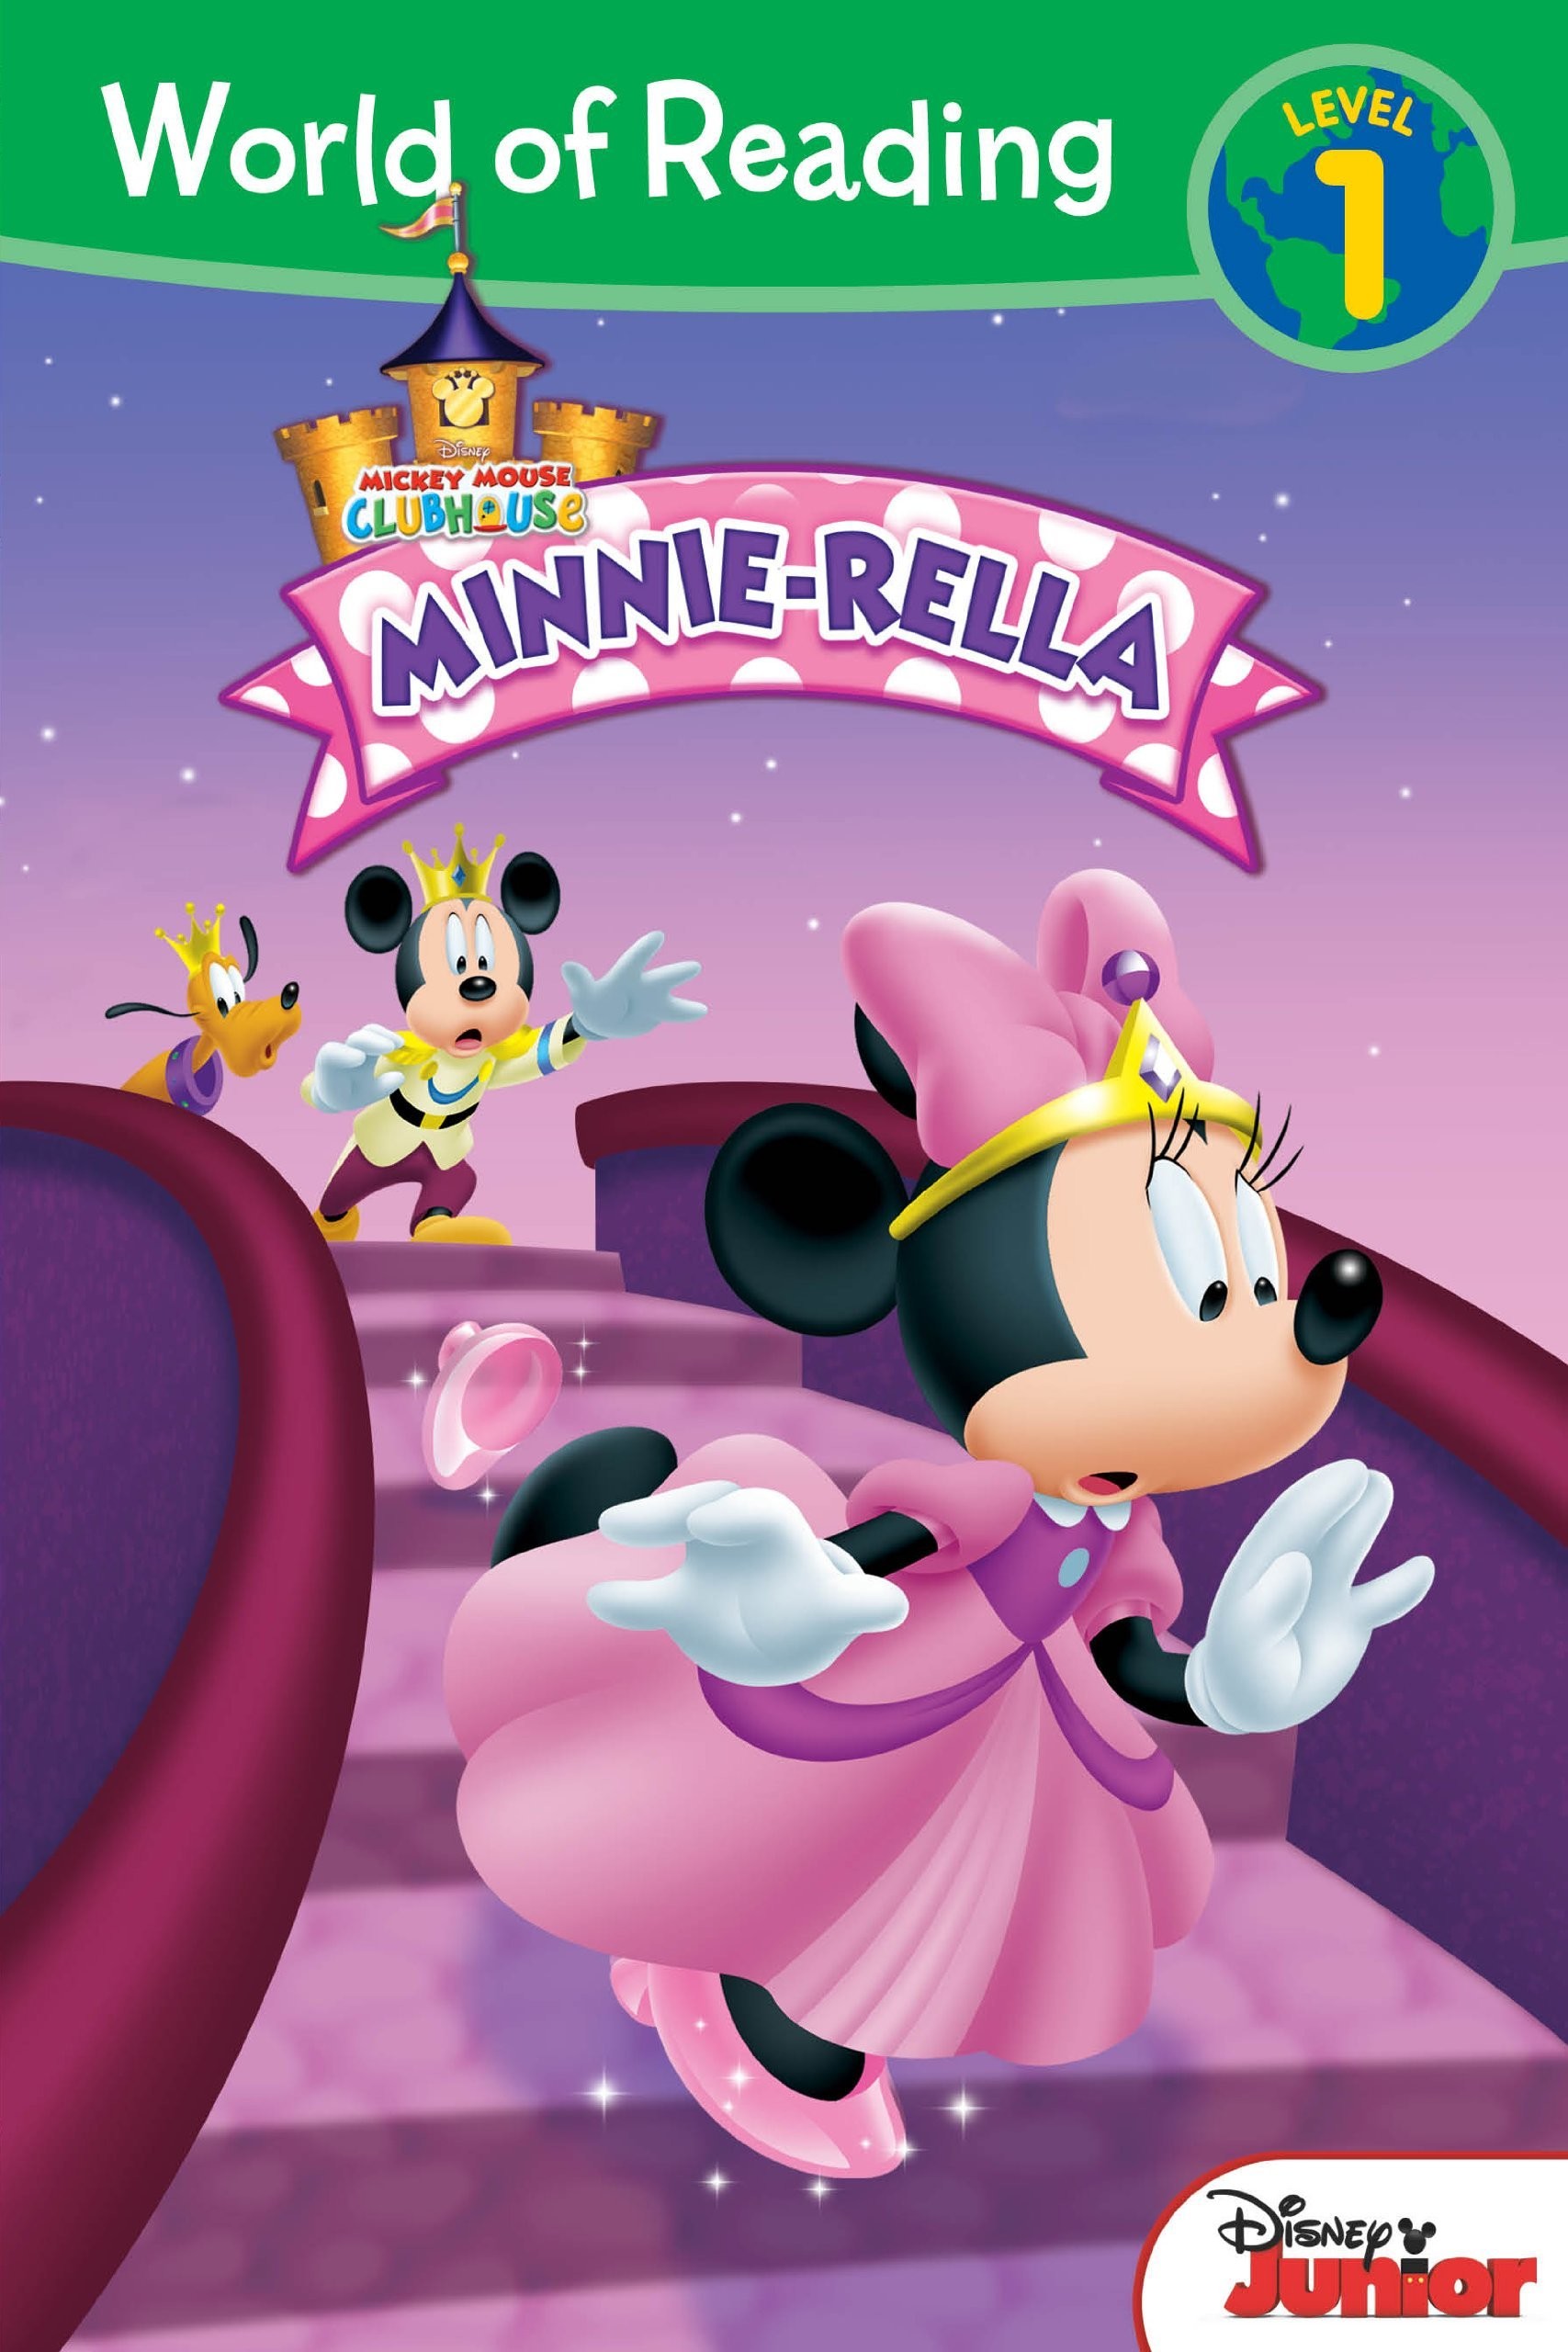 Mickey Mouse Clubhouse Images Minnie Rella Hd Wallpaper - Minnie Rella Book World Of Reading - HD Wallpaper 